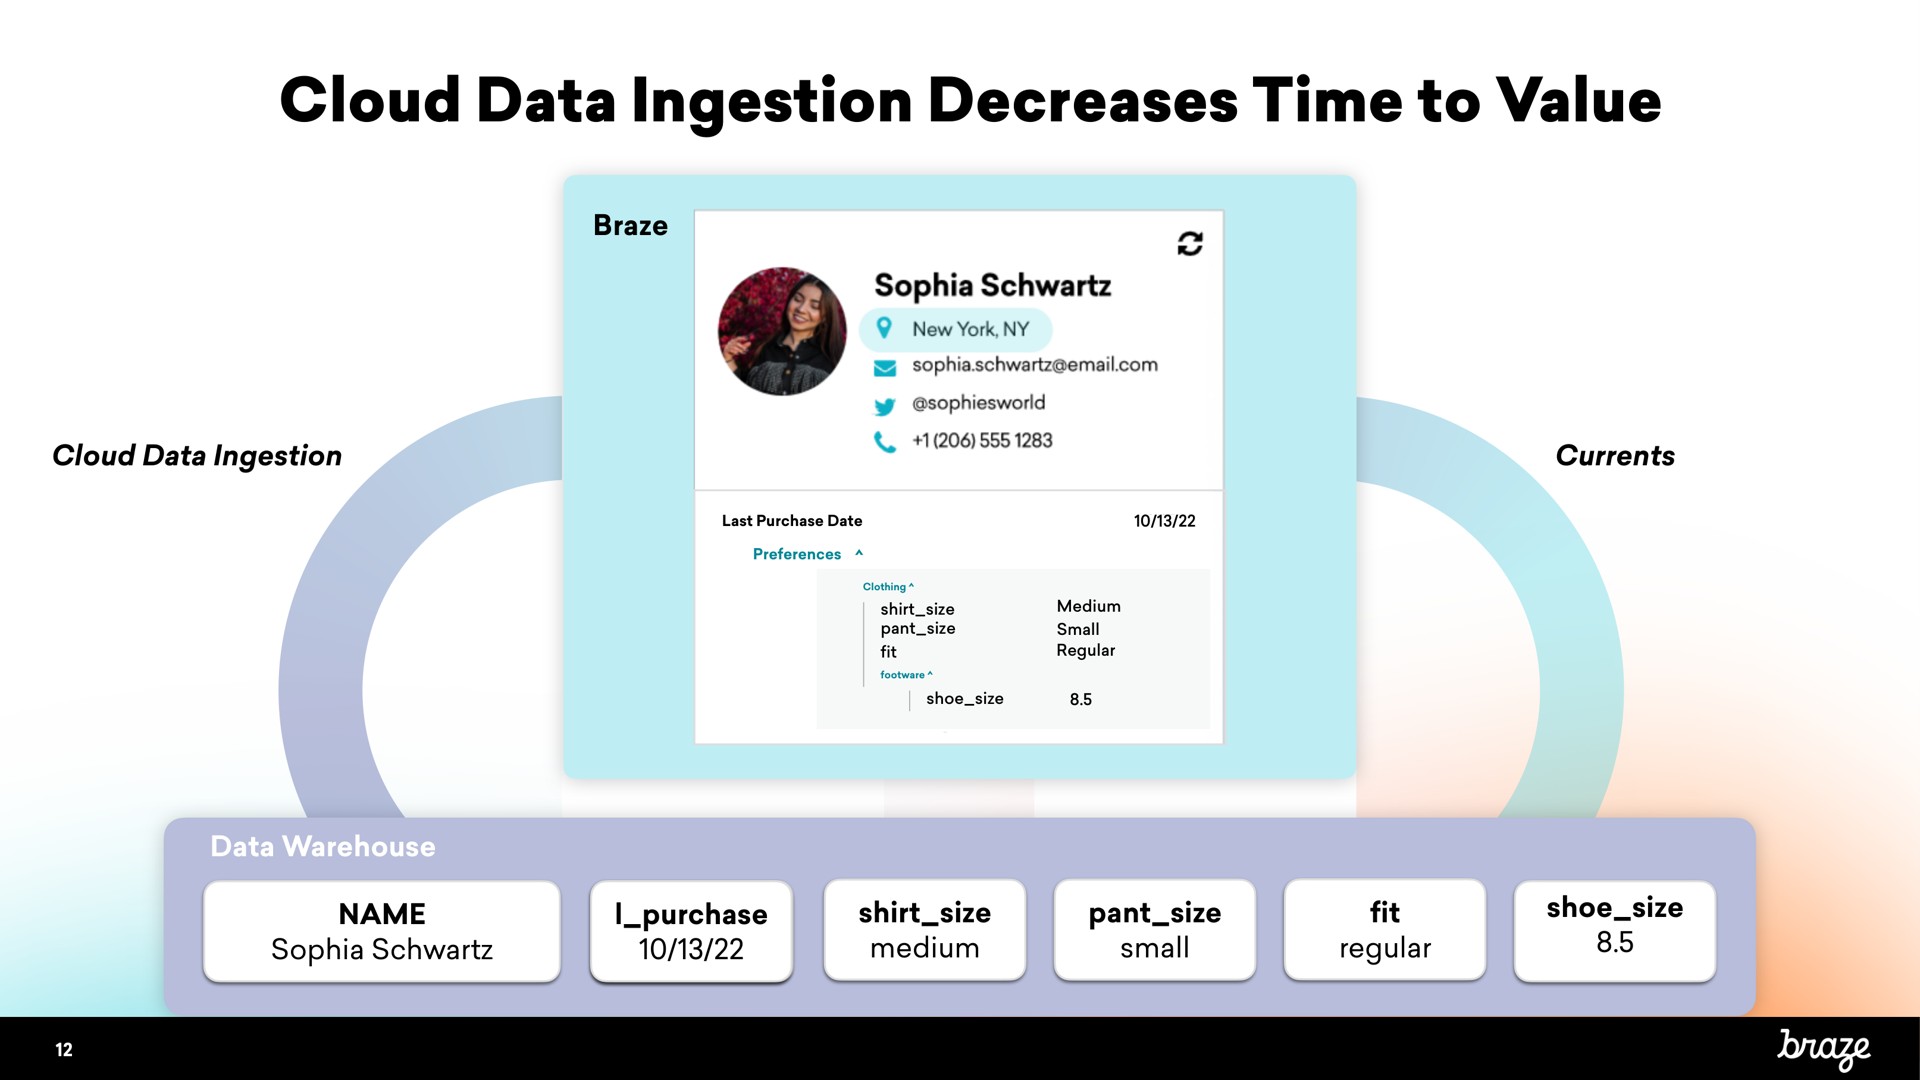 cloud data ingestion decreases time to value | Braze